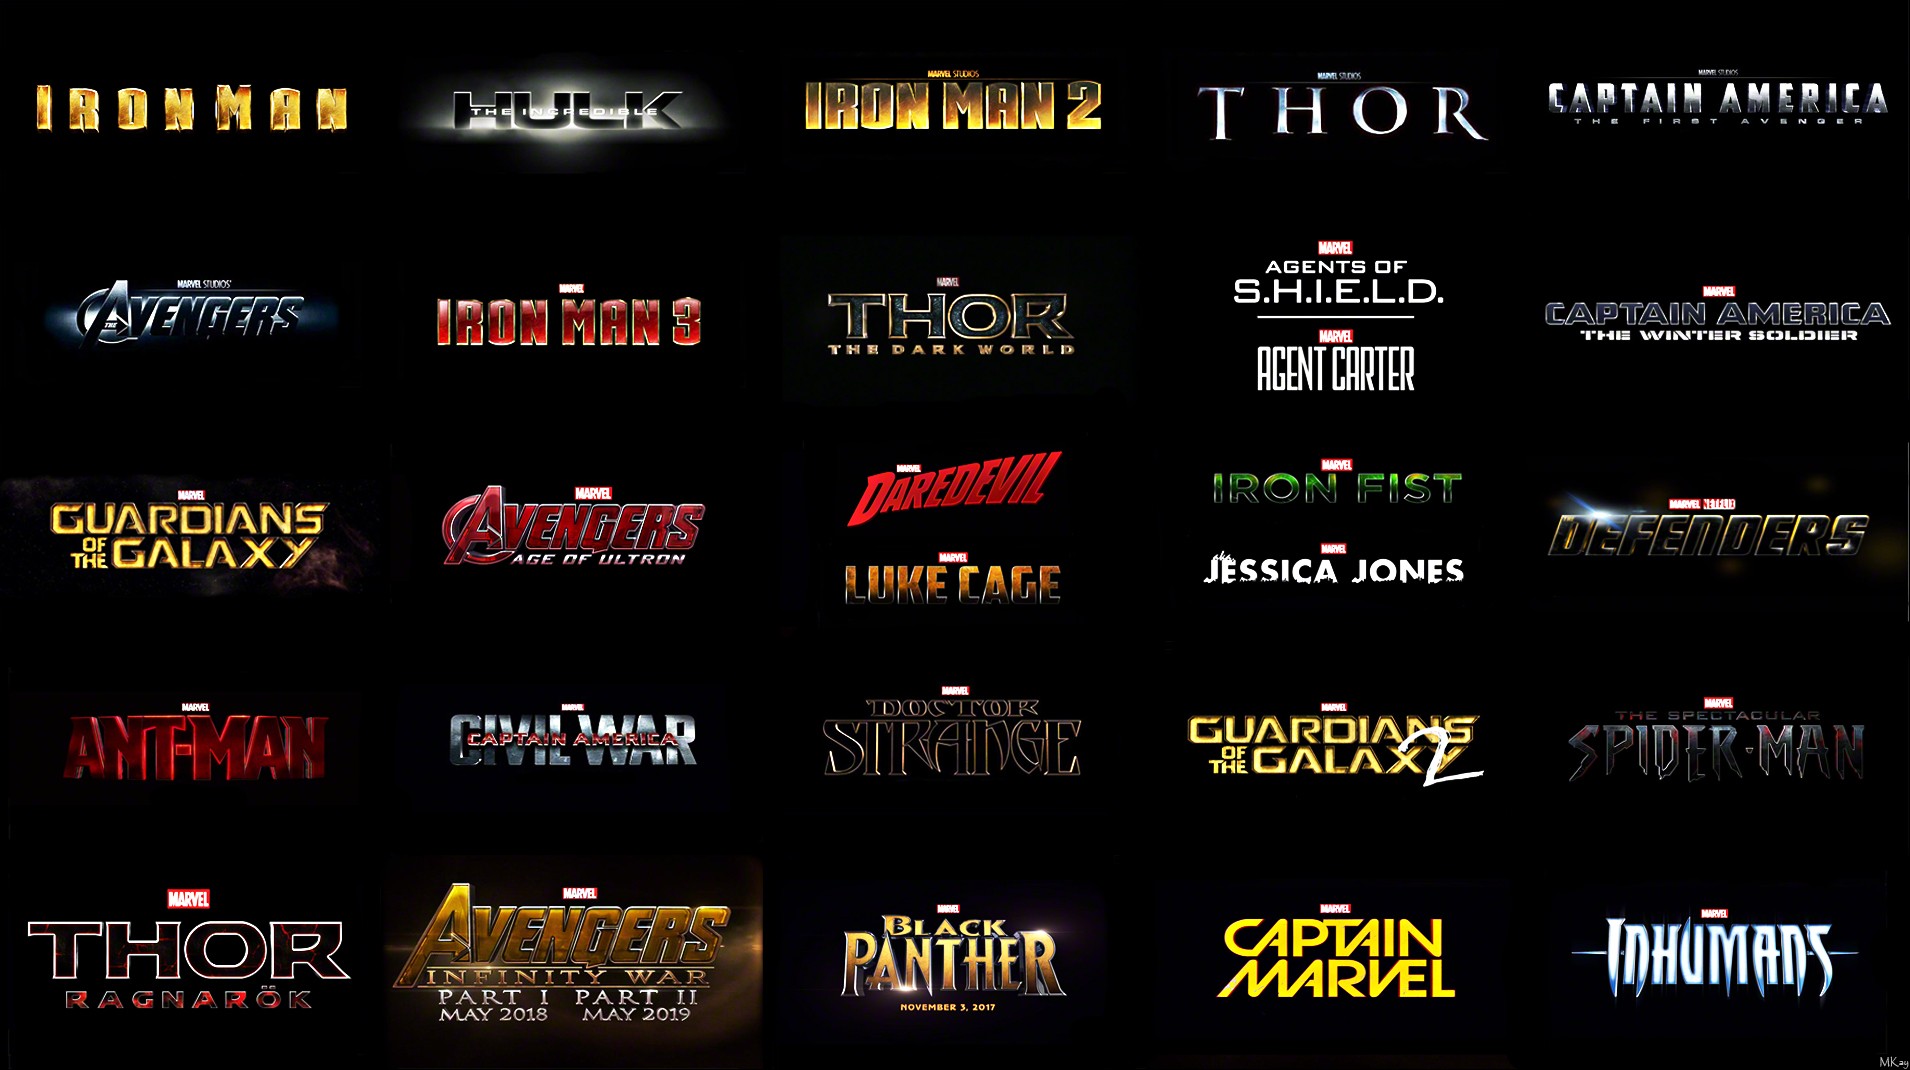 Marvel Cinematic Universe The Avengers Marvel Comics Iron Man Hulk Thor Guardians Of The Galaxy Ant  1910x1070